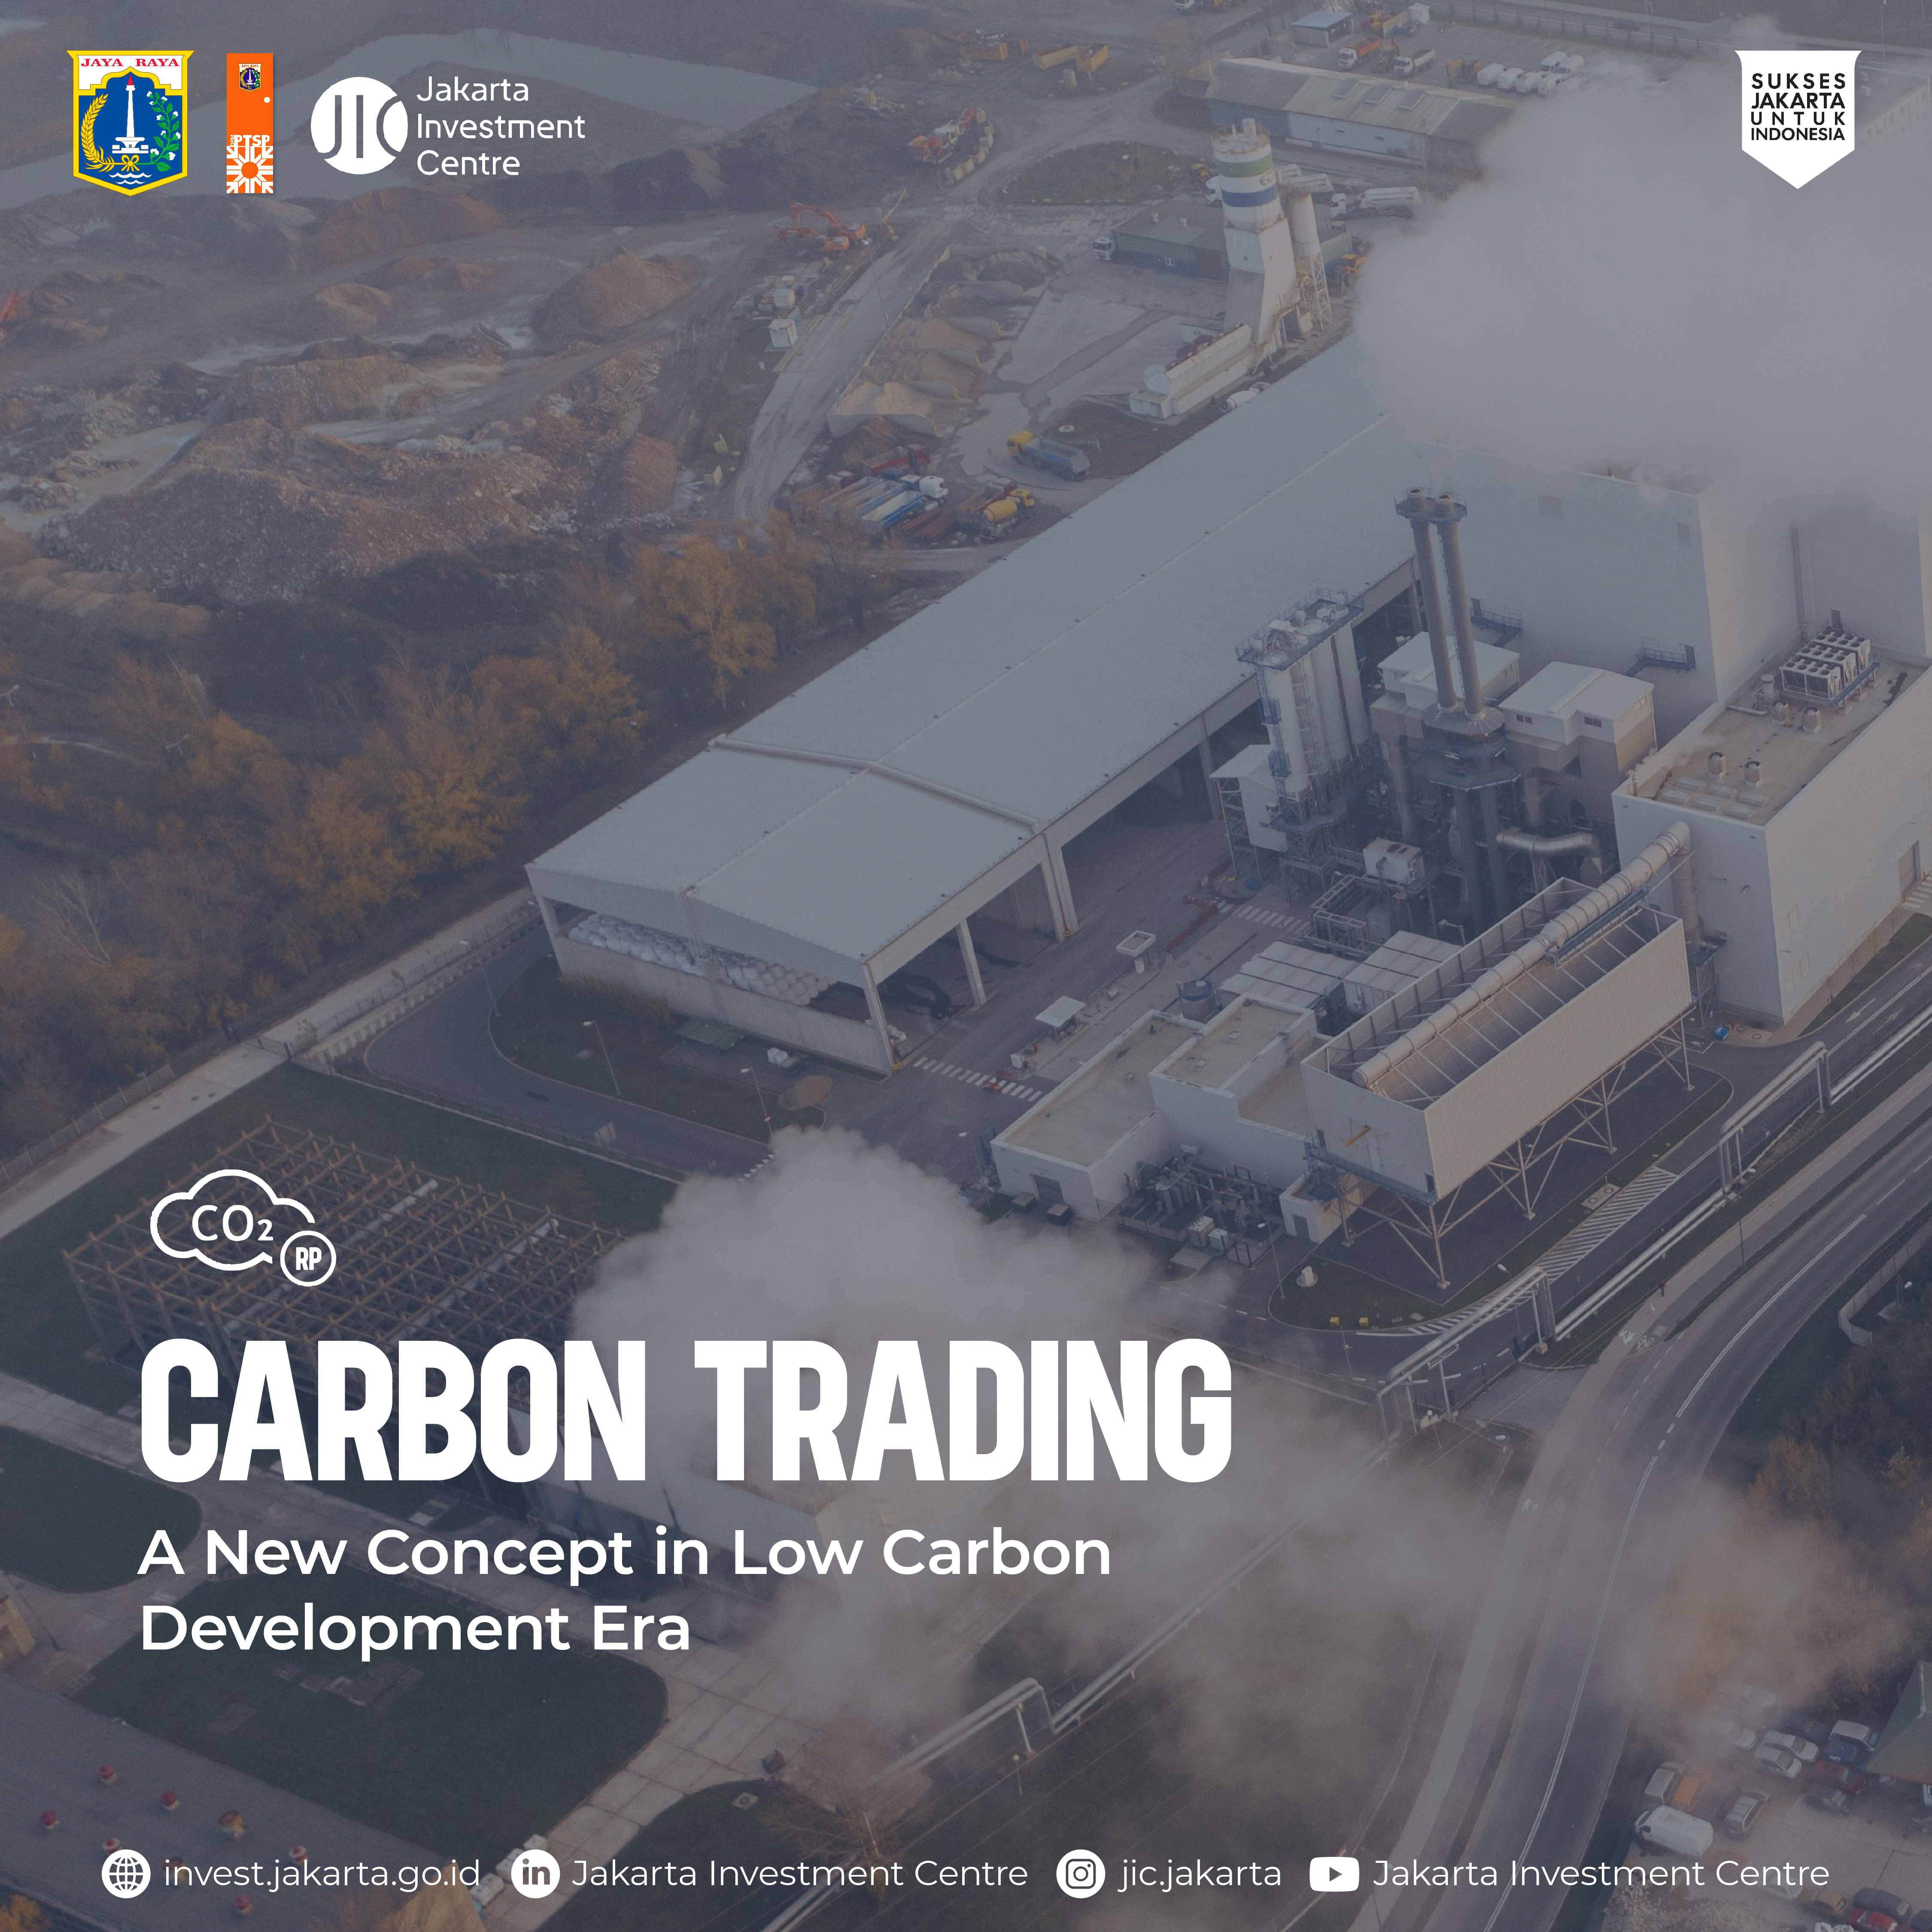 Carbon Trading: A New Concept in Low Carbon Development Era